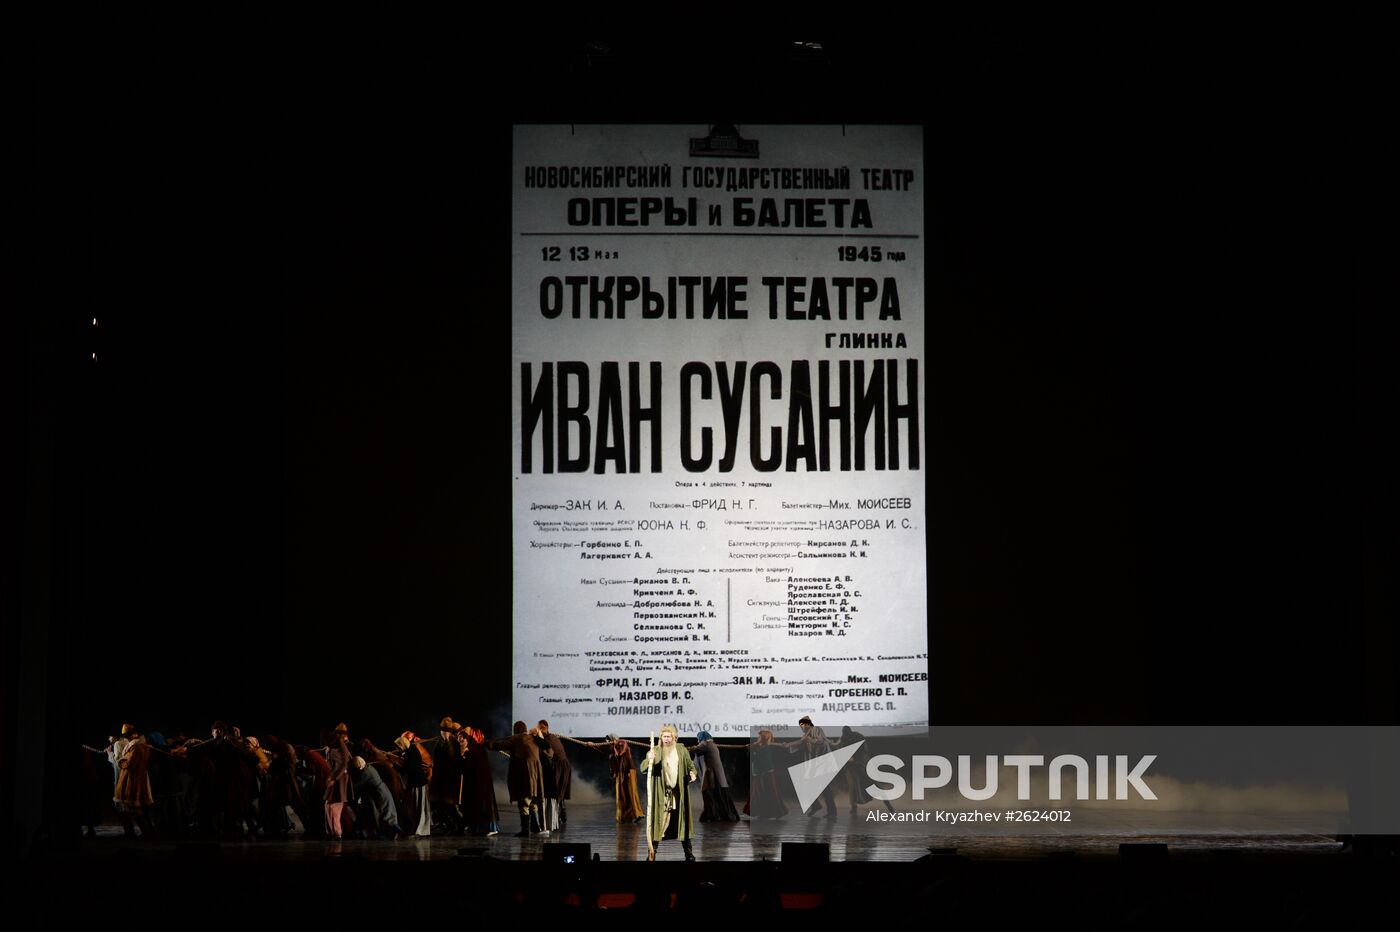 Novosibirsk State Opera and Ballet Theater marks its 70th anniversary